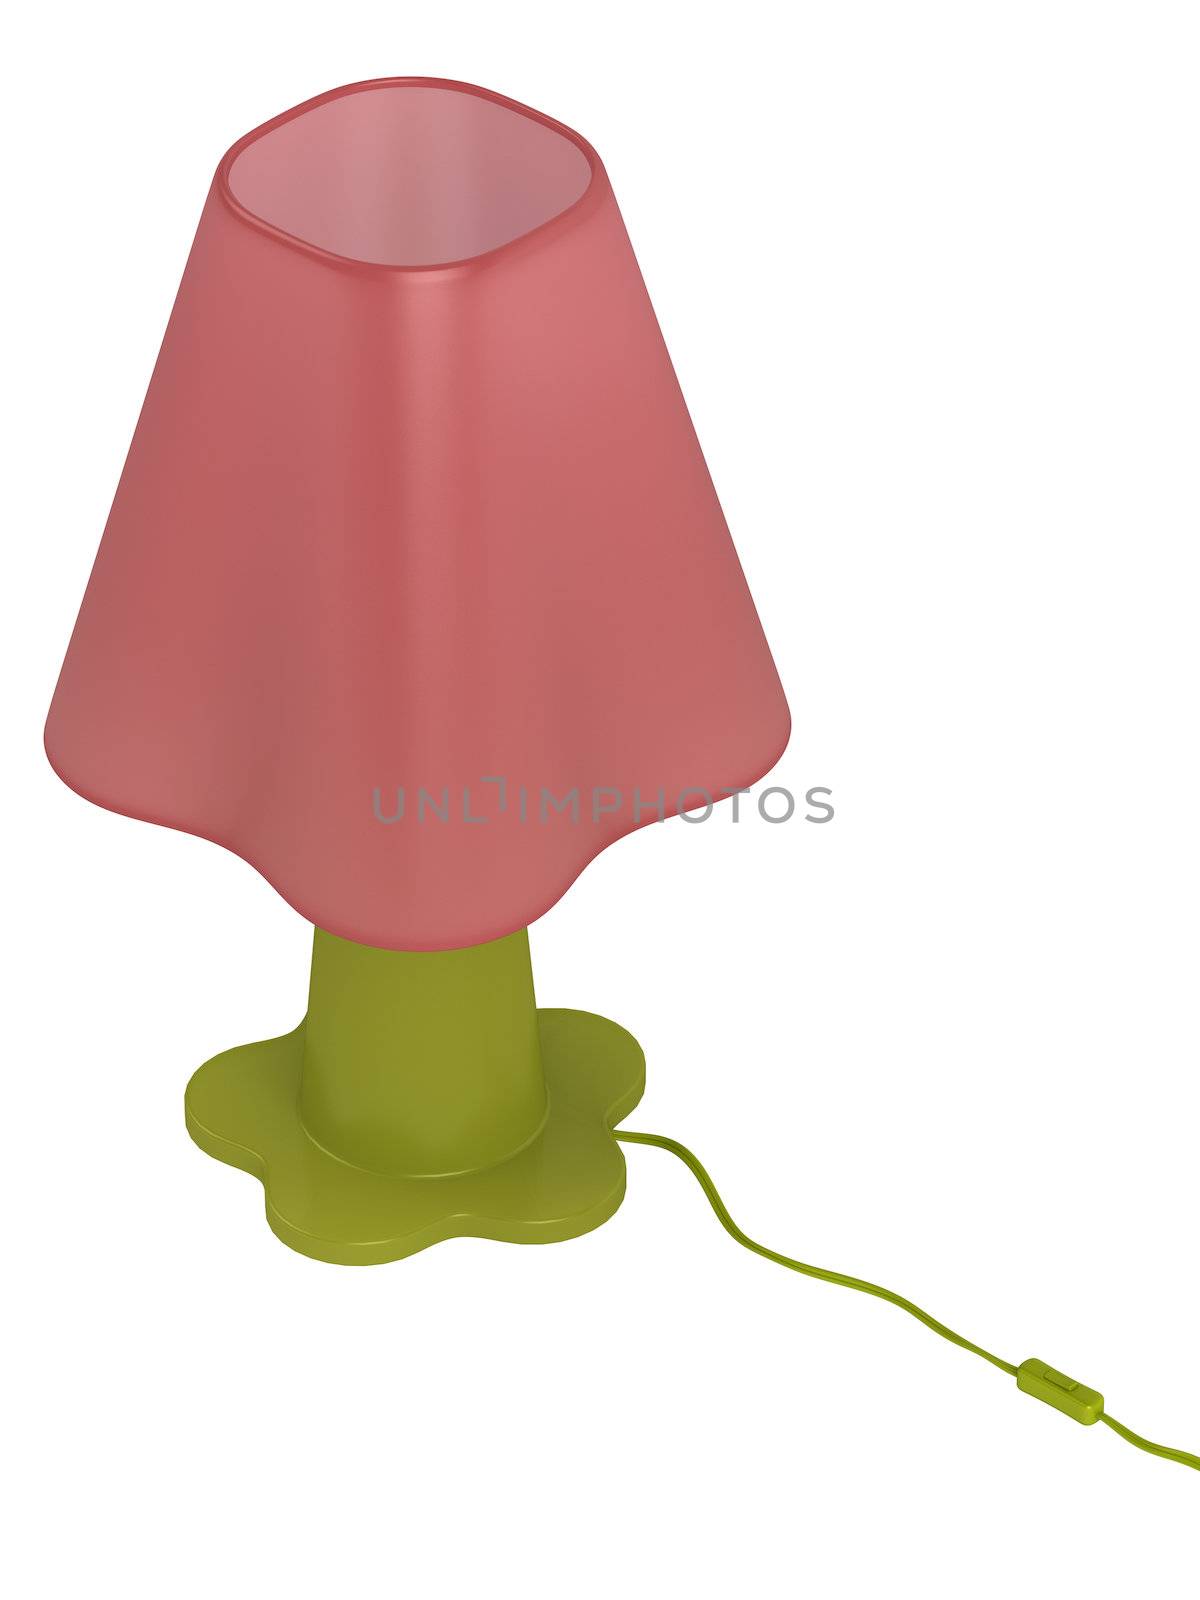 Modern green and pink lamp by AlexanderMorozov